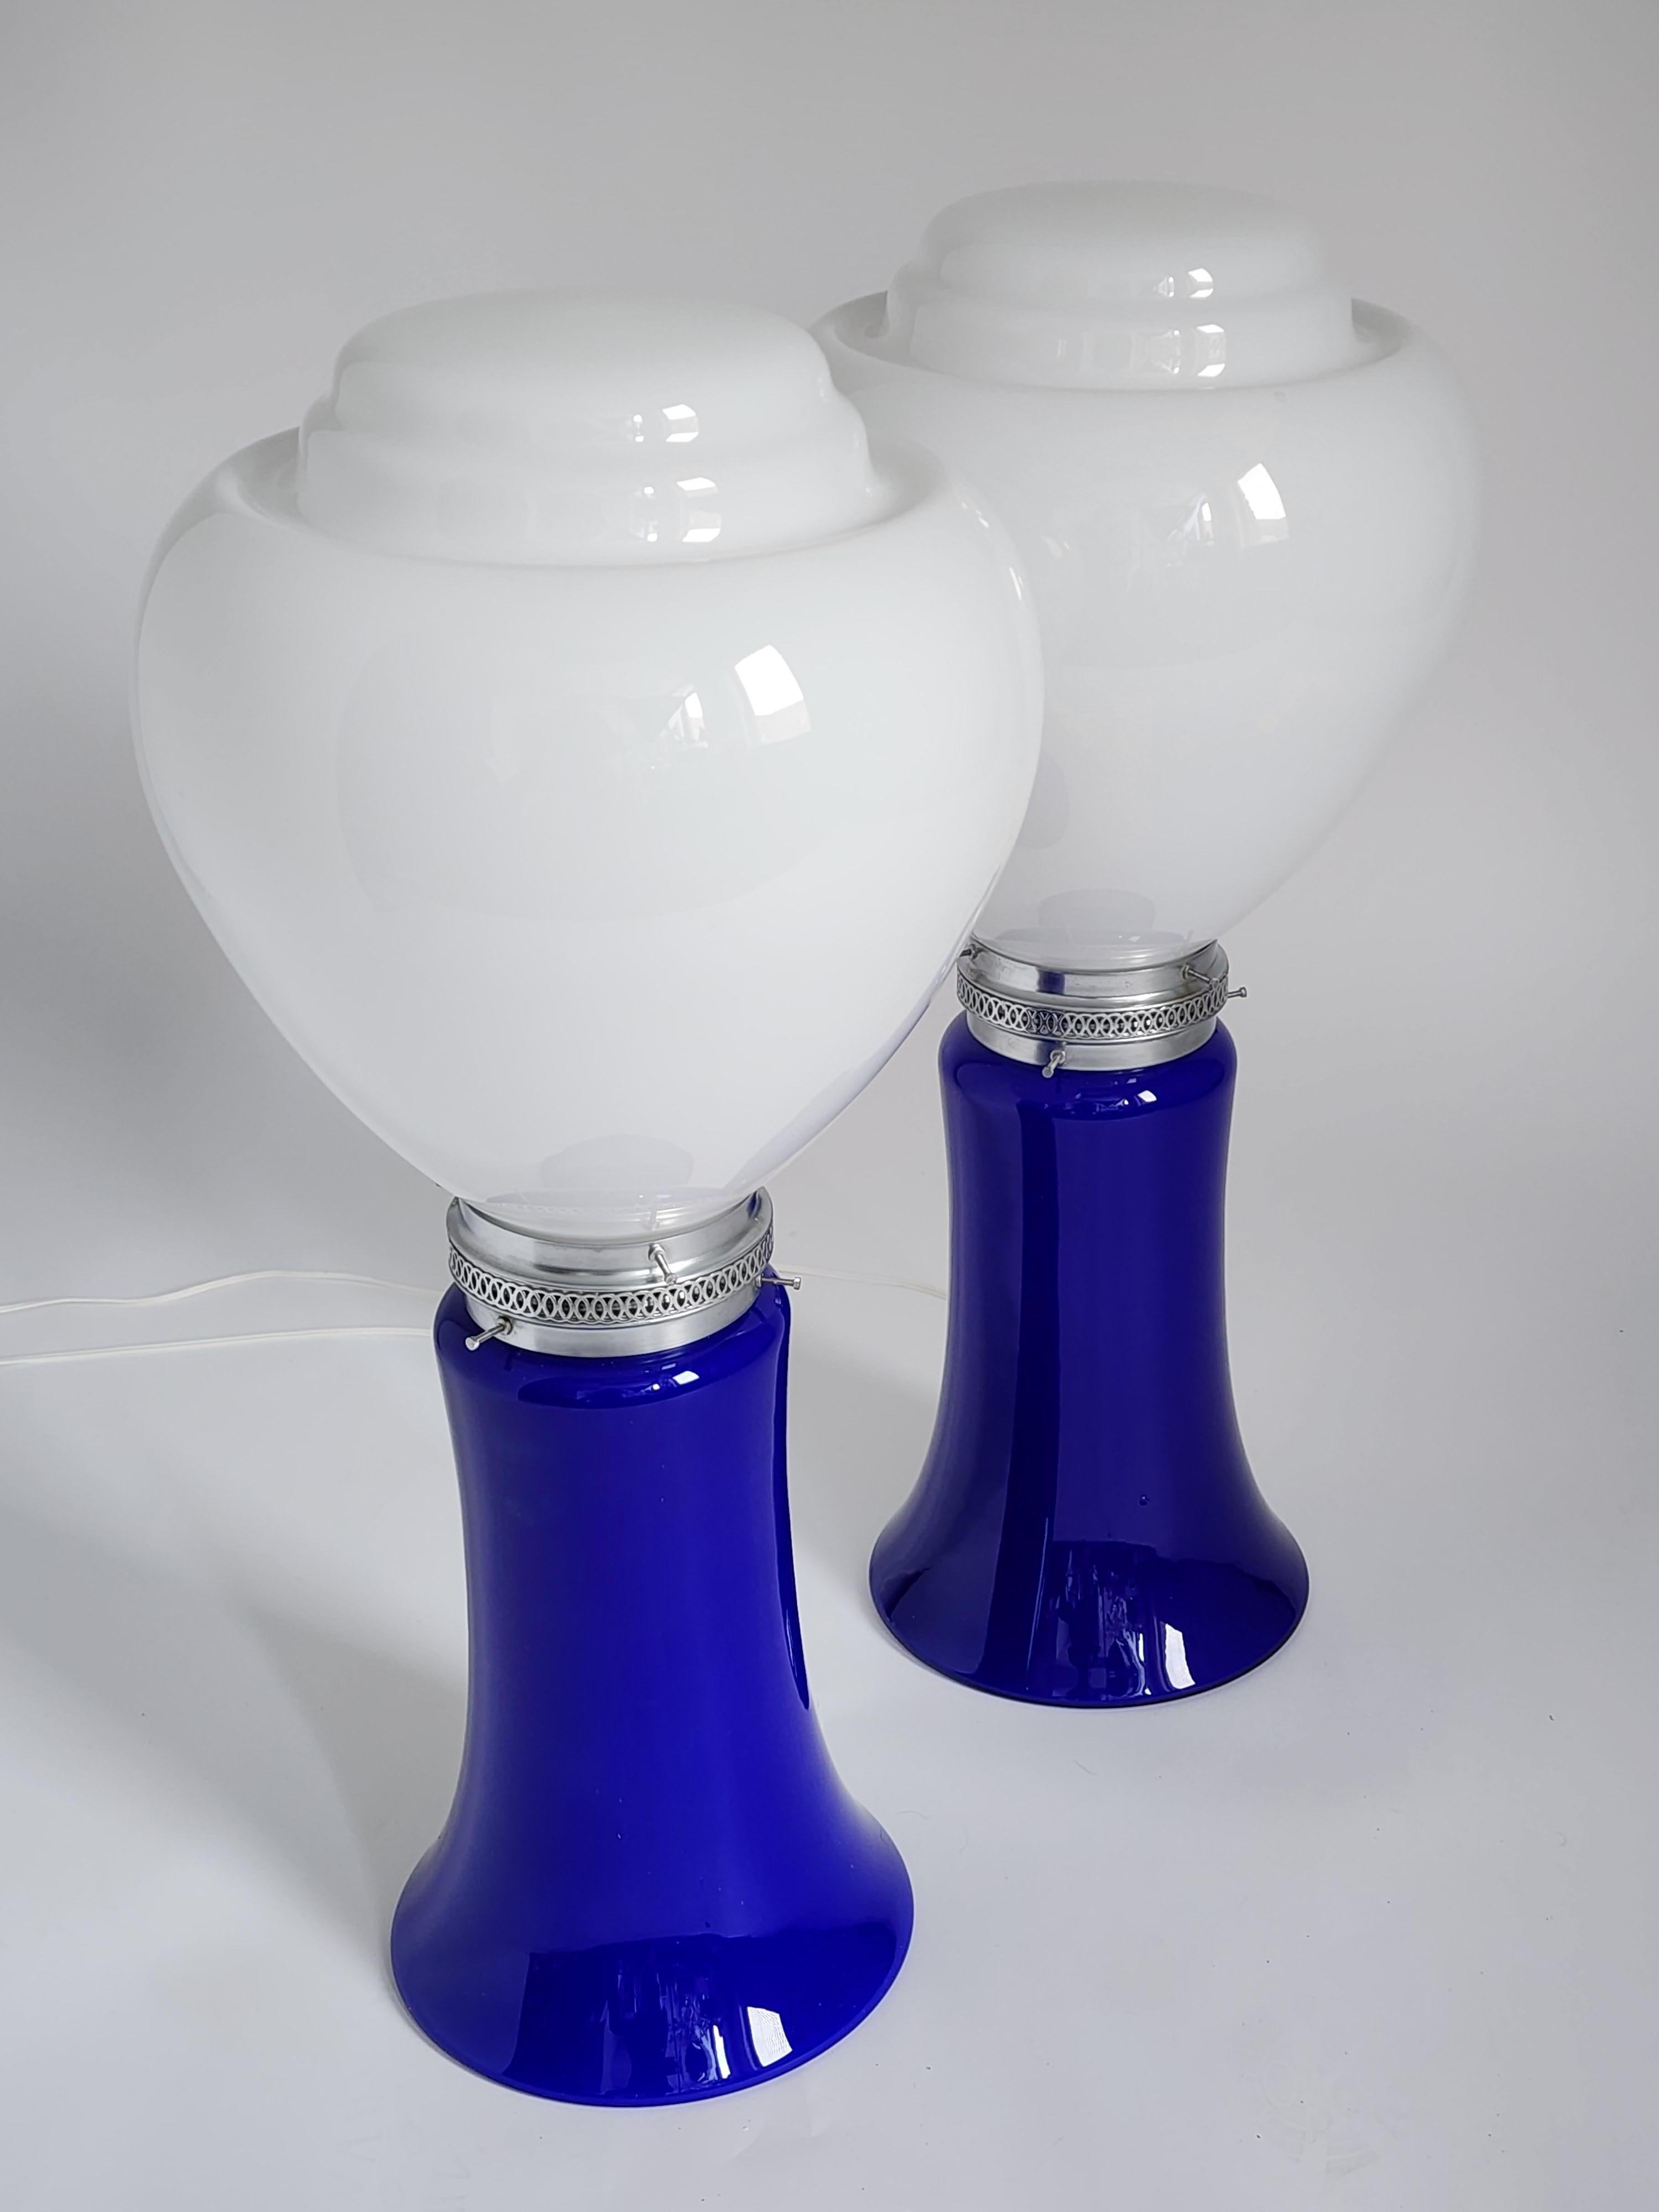 Massive Carlo Nason table lamp for Mazzega with an opaline shade sitting on a Cobalt blue base. 

Total height 28 in. Shade Measure 13.75 in wide by 14.75 high. 

Each lamp contain two E26 Size socket rated at 60 watt . One bulb in top shade the